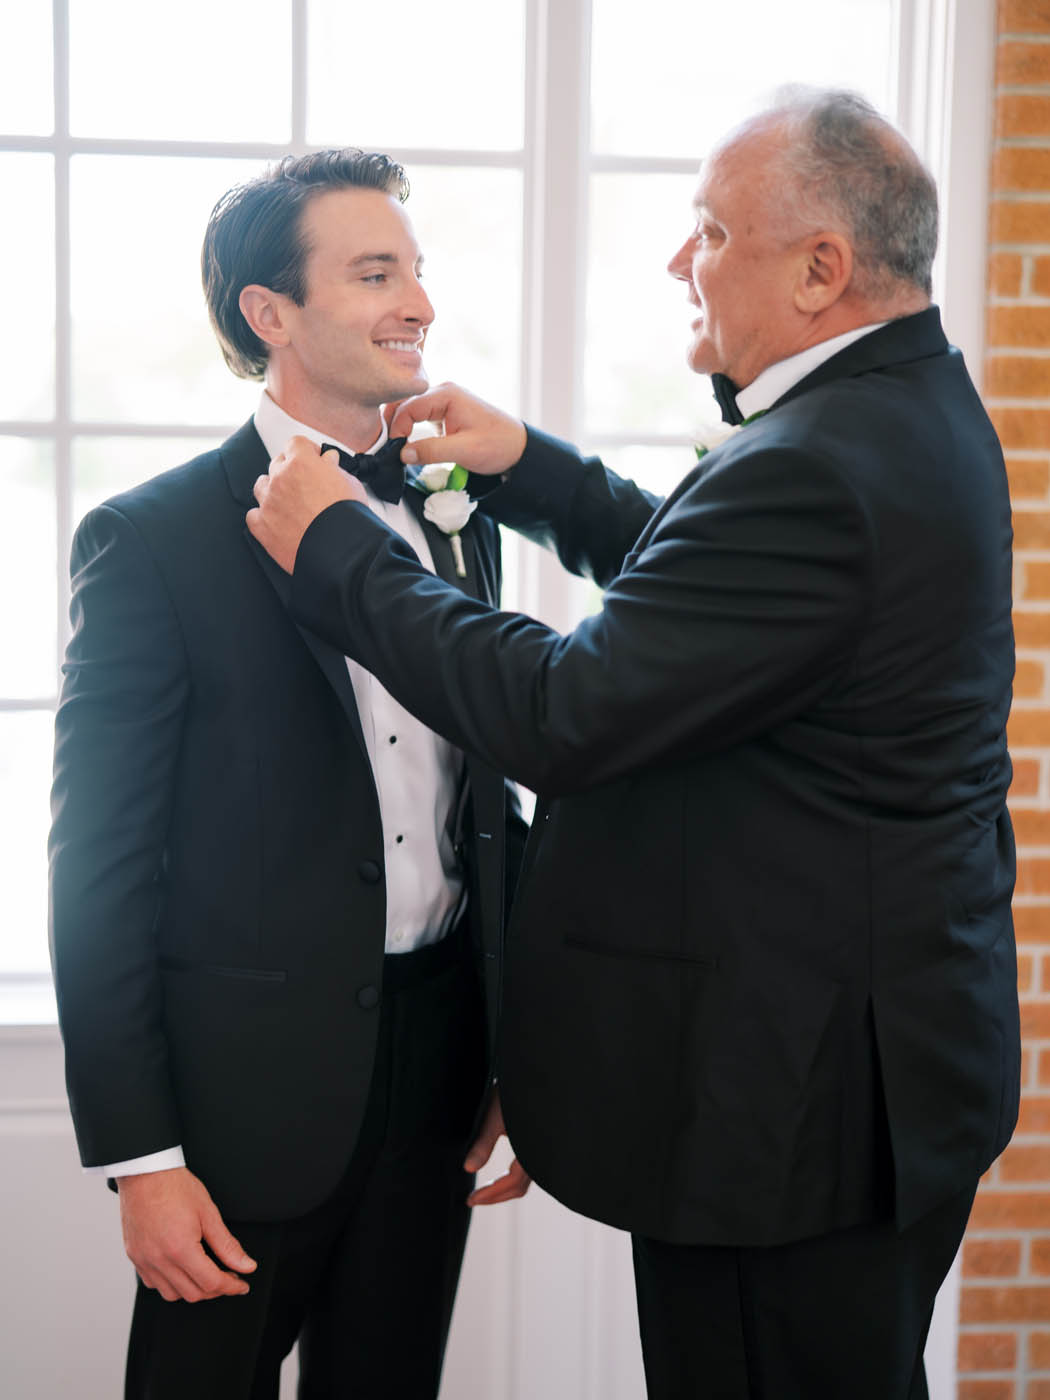 The groom is helped by his father as he ties his bowtie